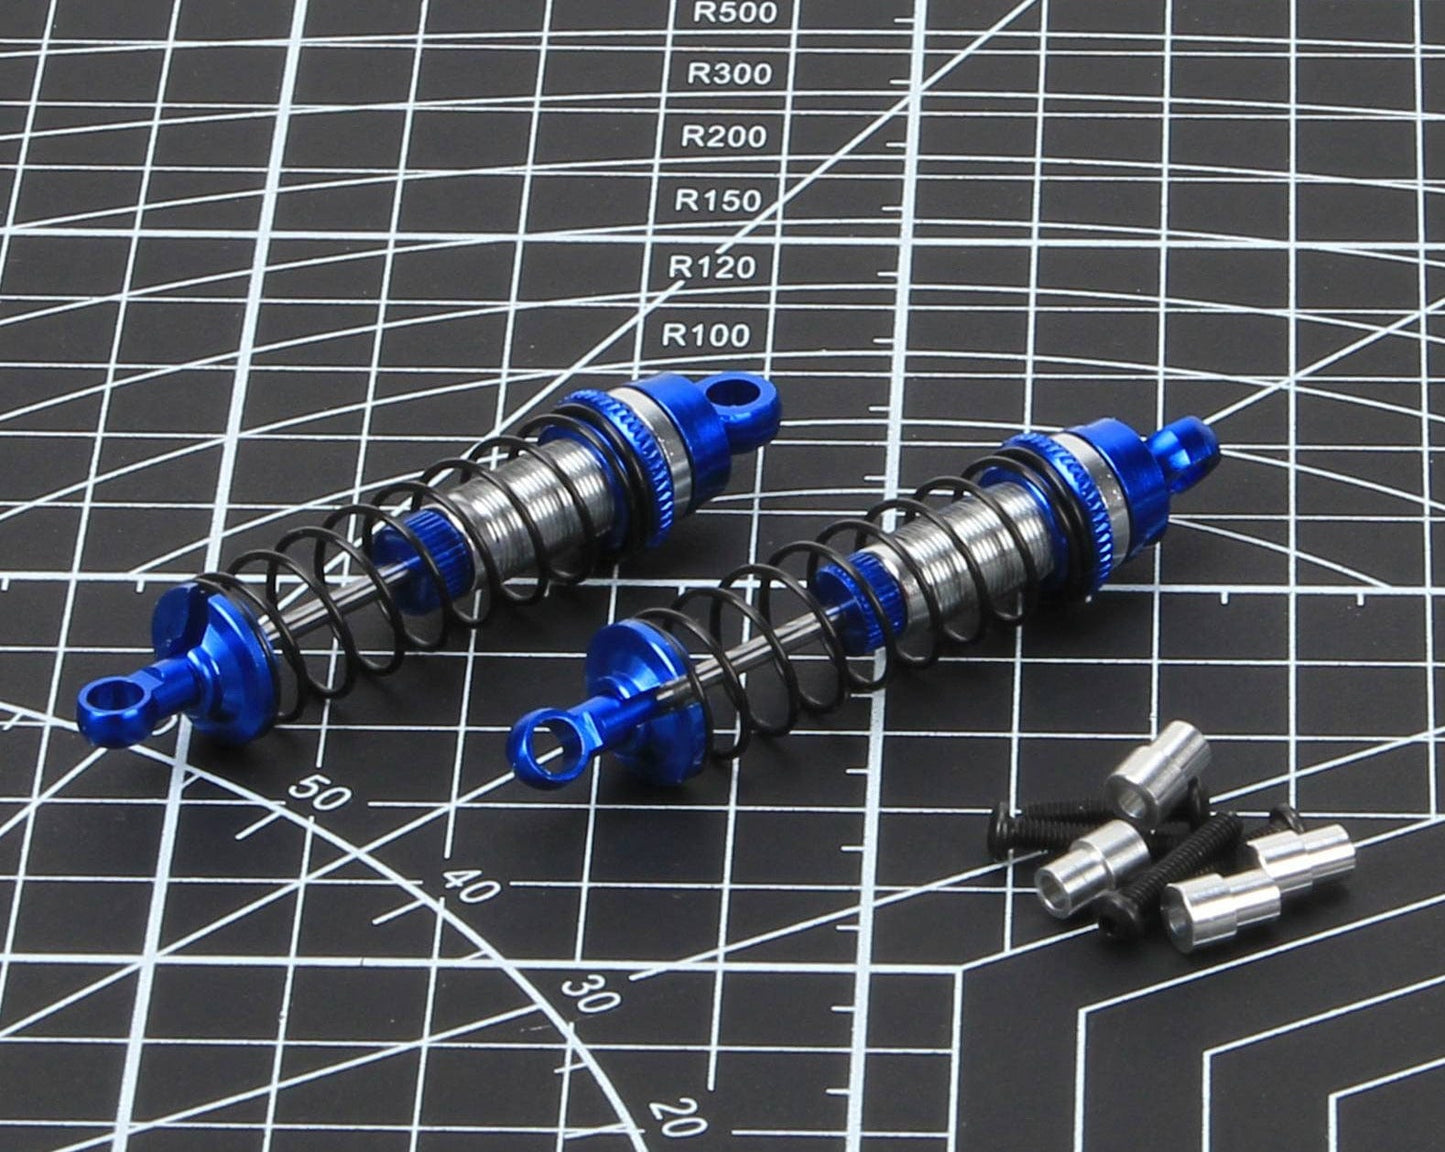 RCAWD Traxxas Latrax RCAWD Oil-filled Assembled with Springs Shocks 2pcs for 1/18 Traxxas Latrax Upgrades